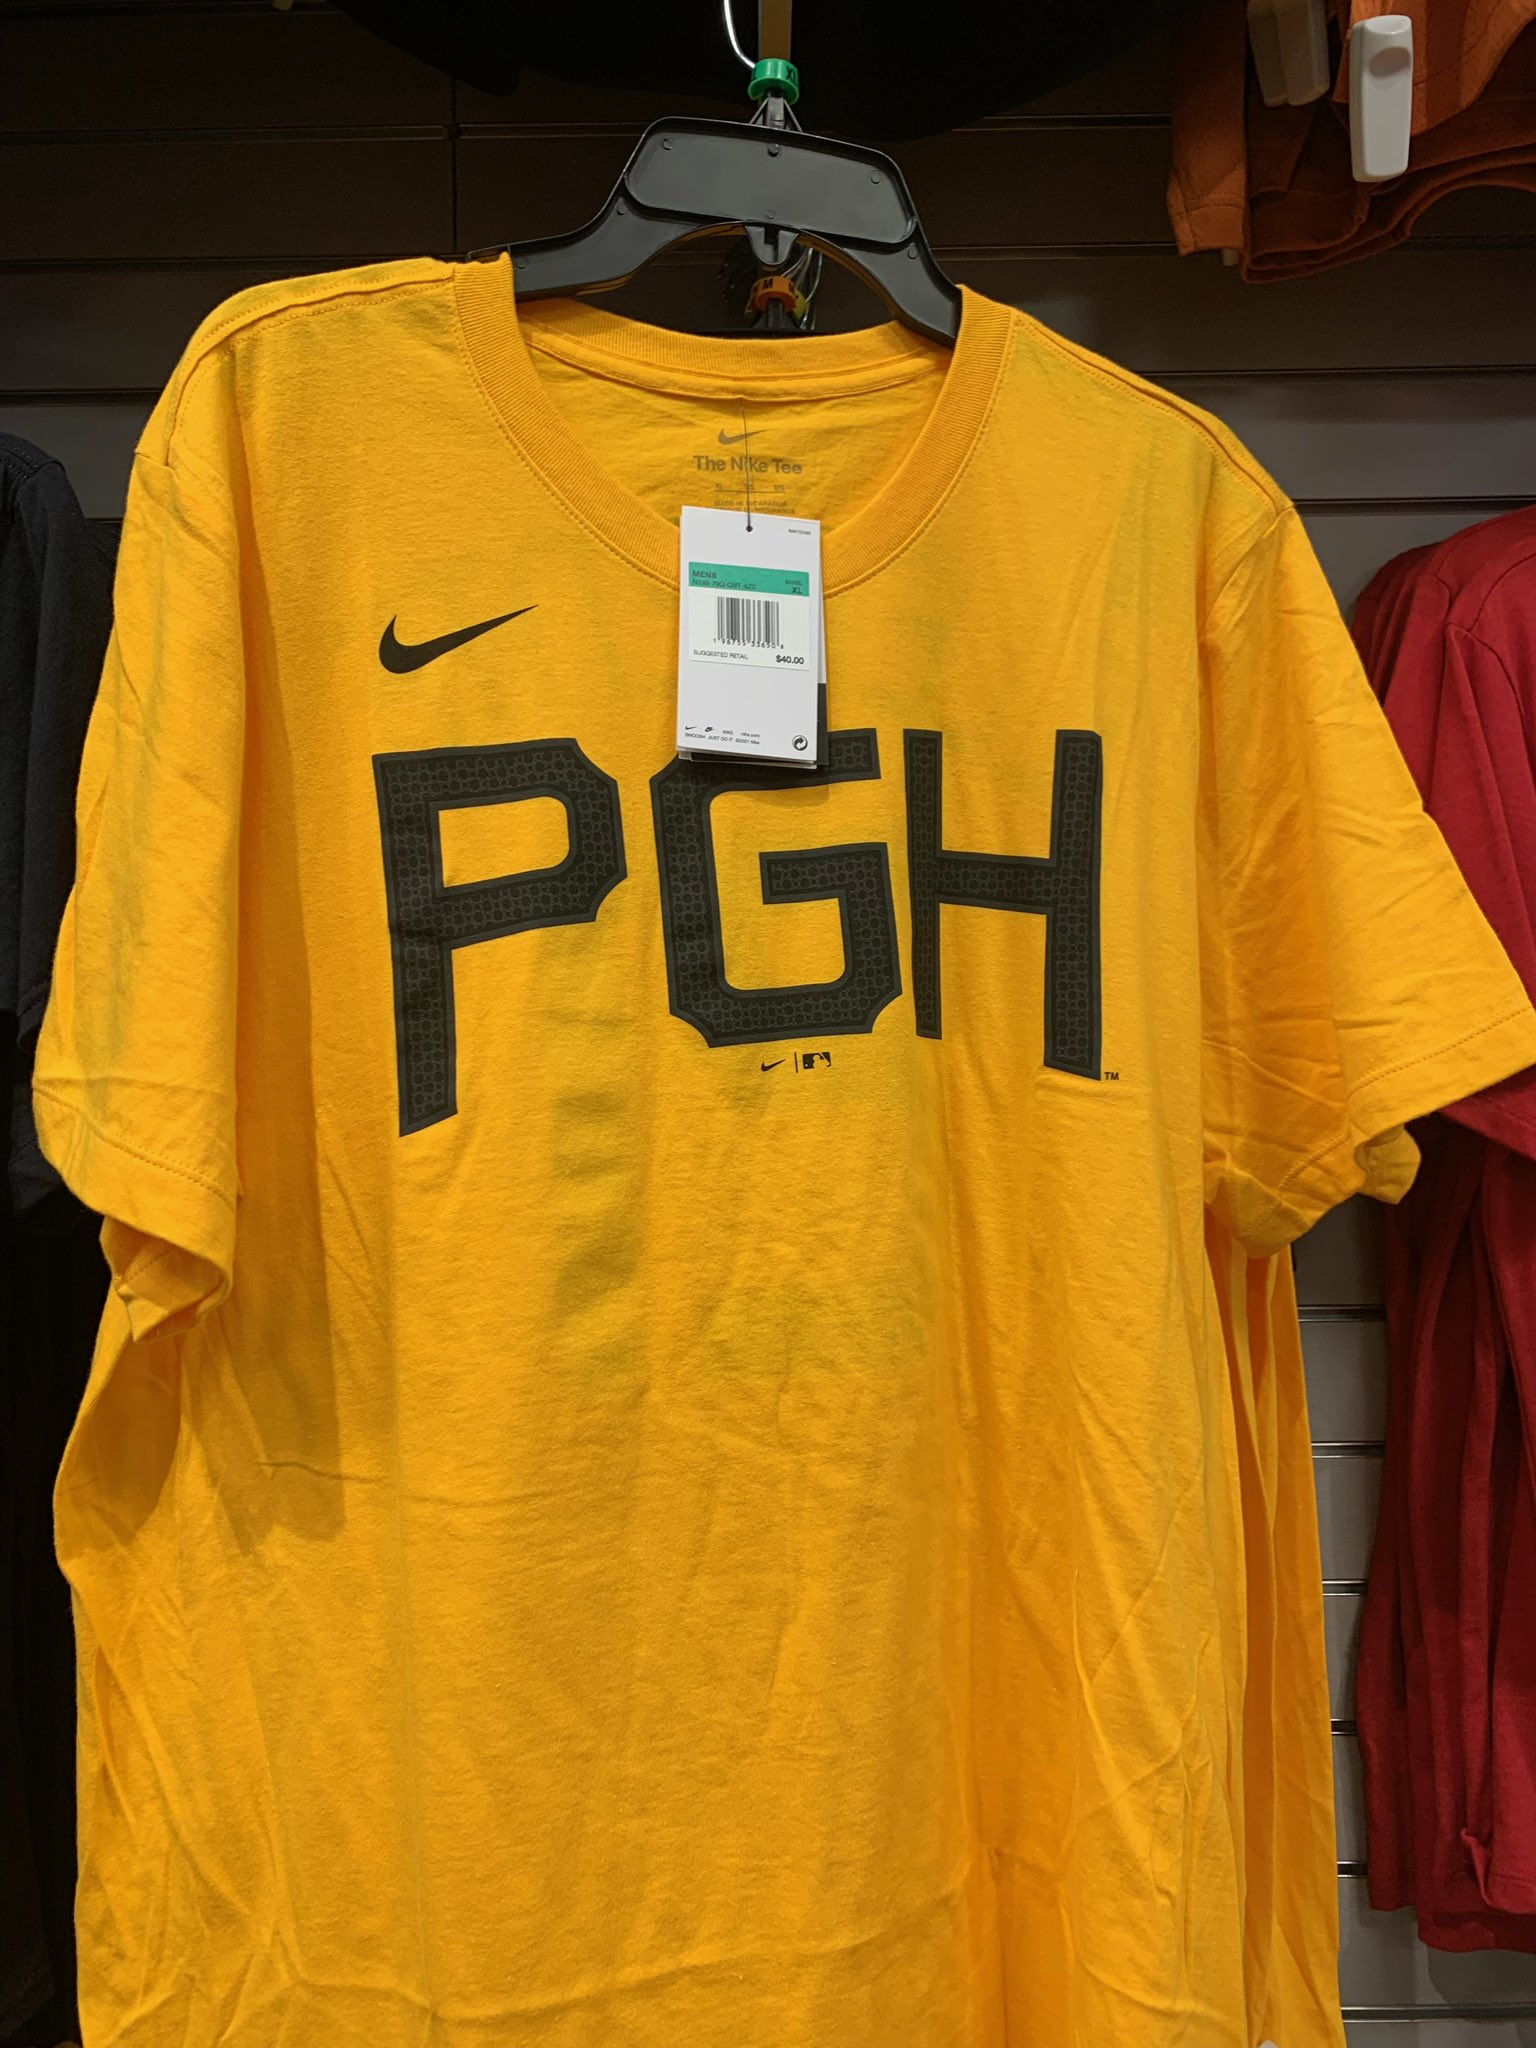 leaked city connect jerseys